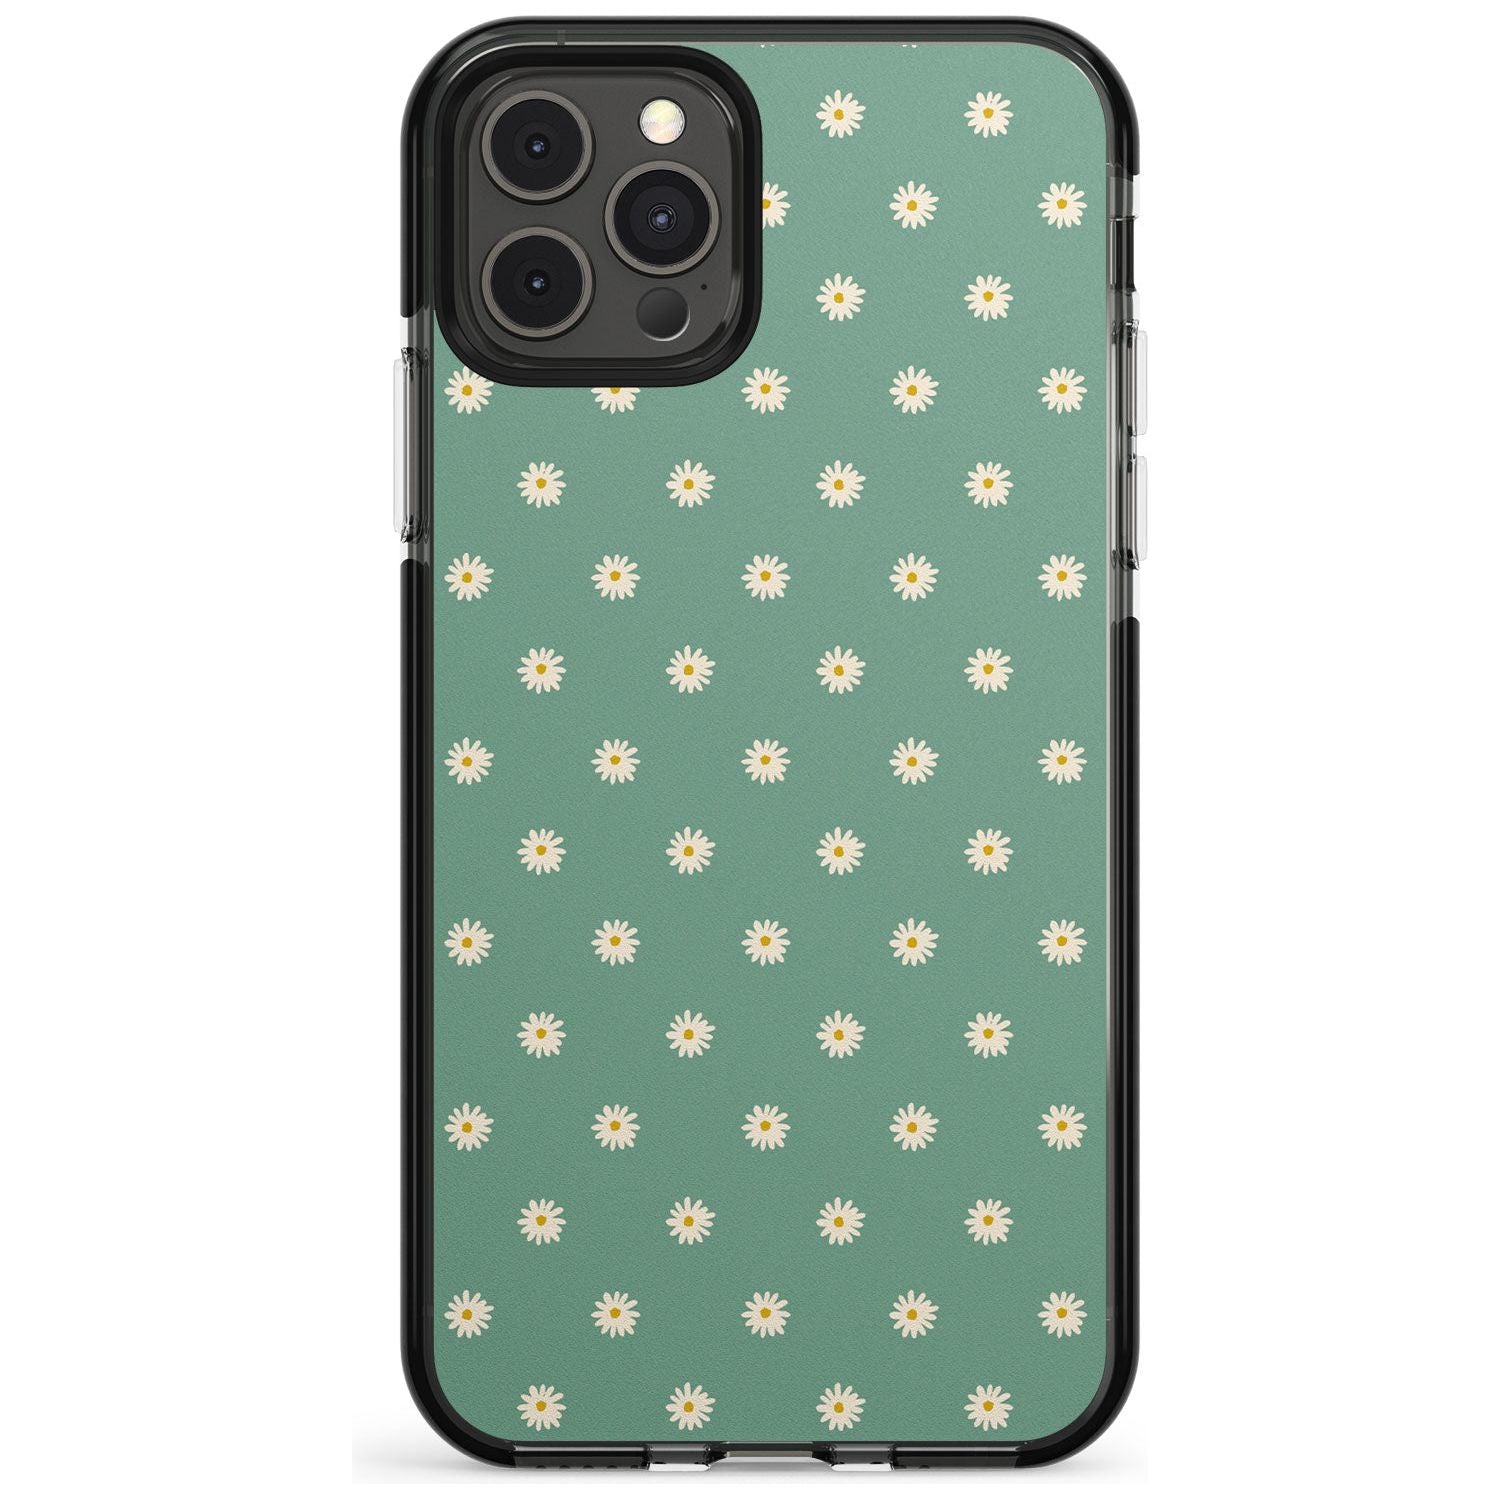 Daisy Pattern - Teal Cute Floral Daisy Design Pink Fade Impact Phone Case for iPhone 11